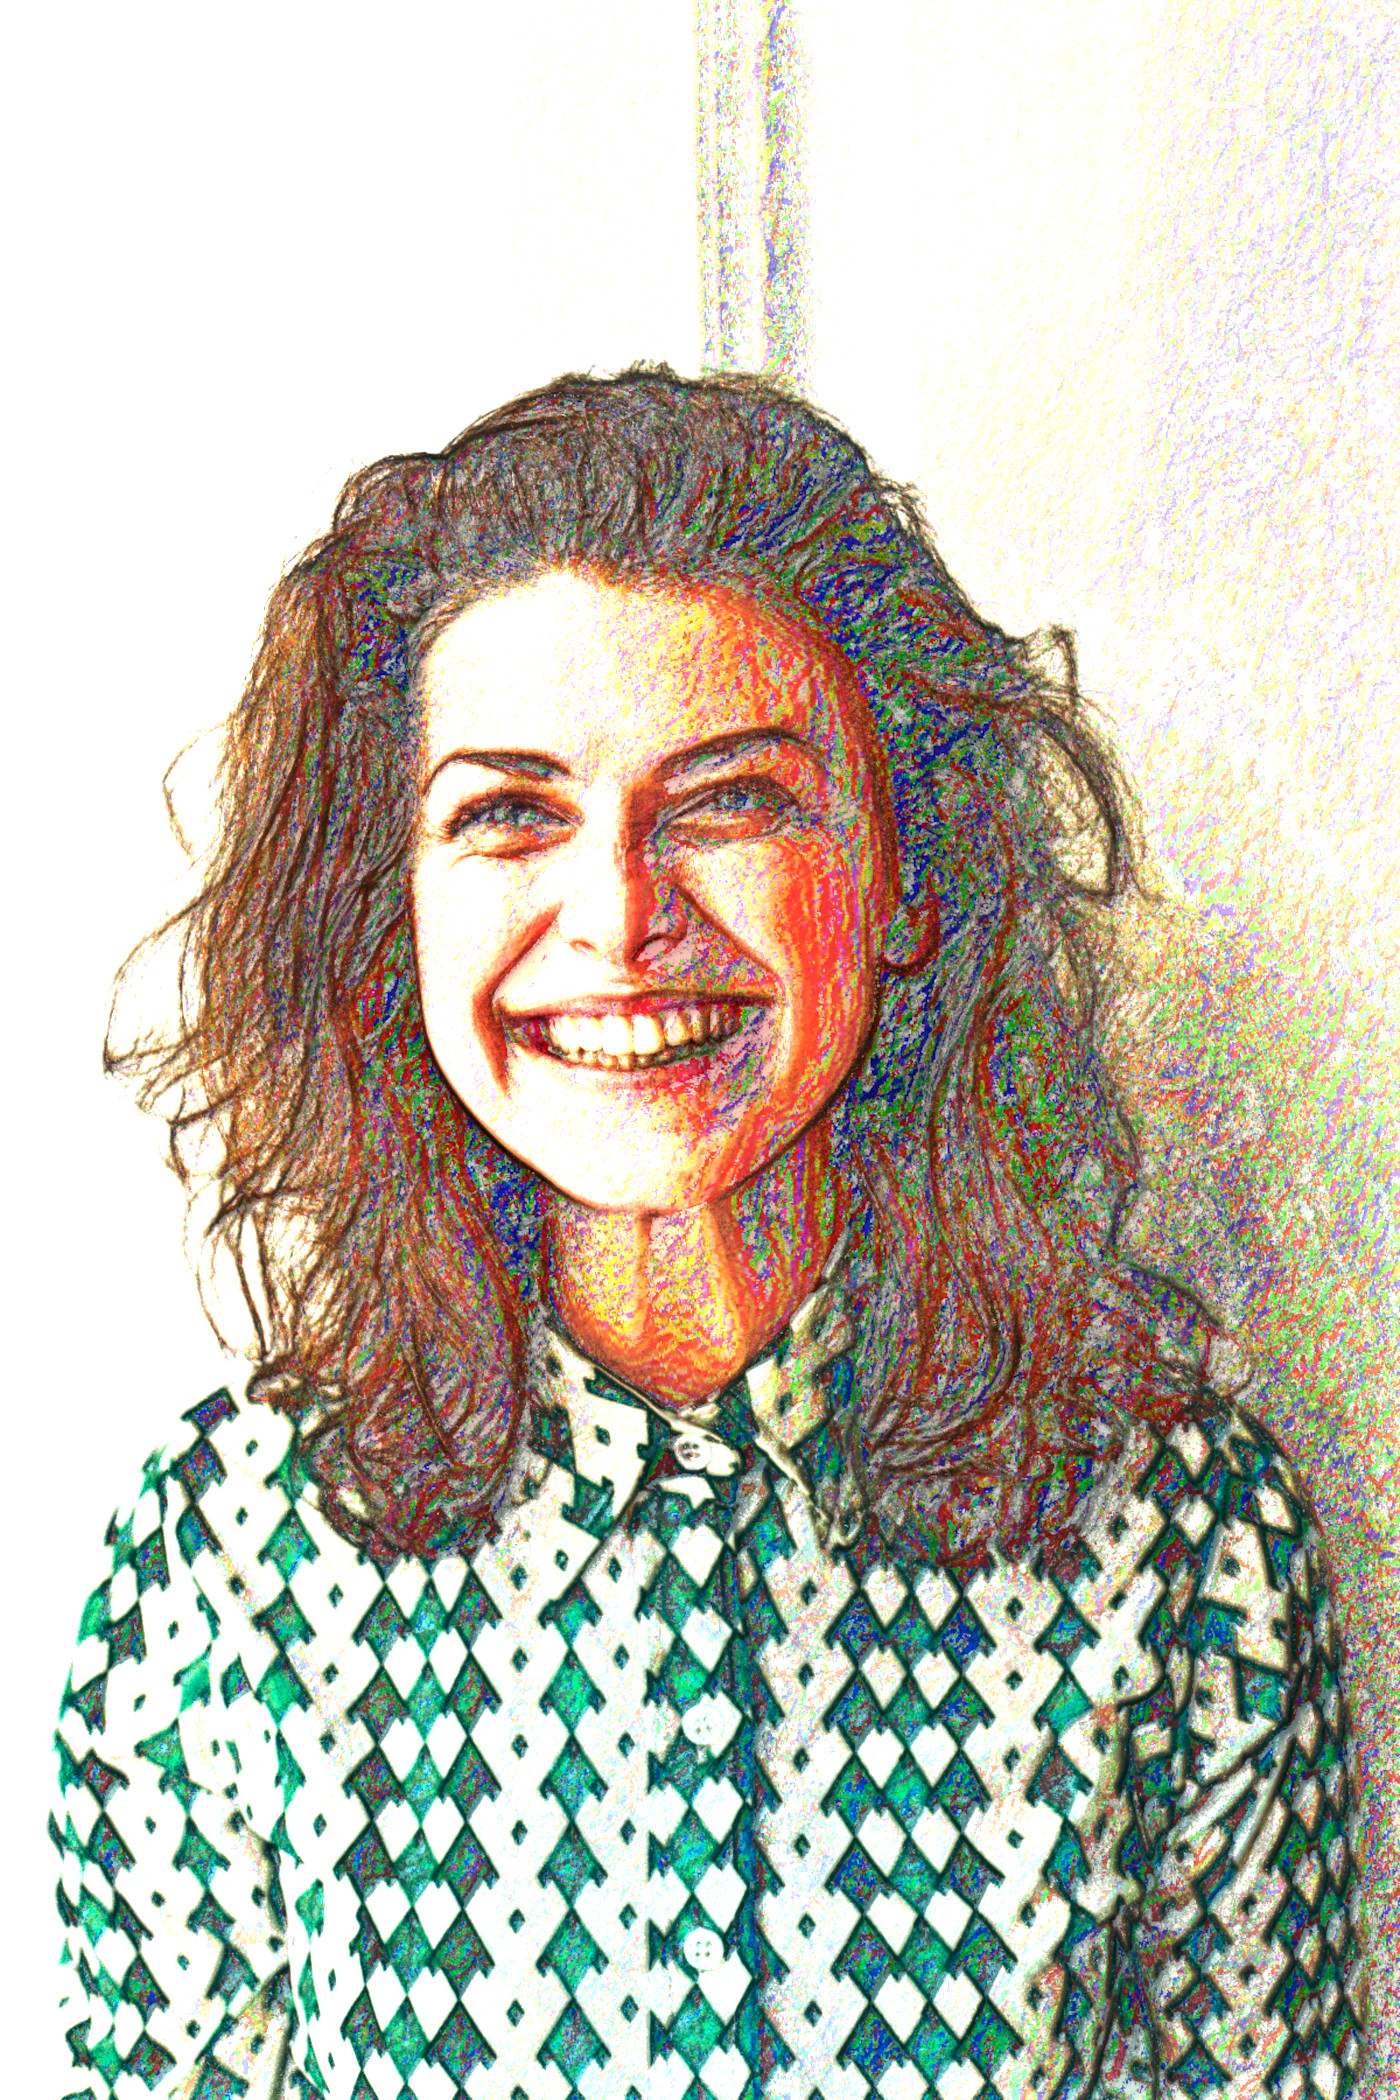 2021-02-18 08-34-53 pexels-andrea-piacquadio-774909 stroked sketched, coloured (new look).jpeg